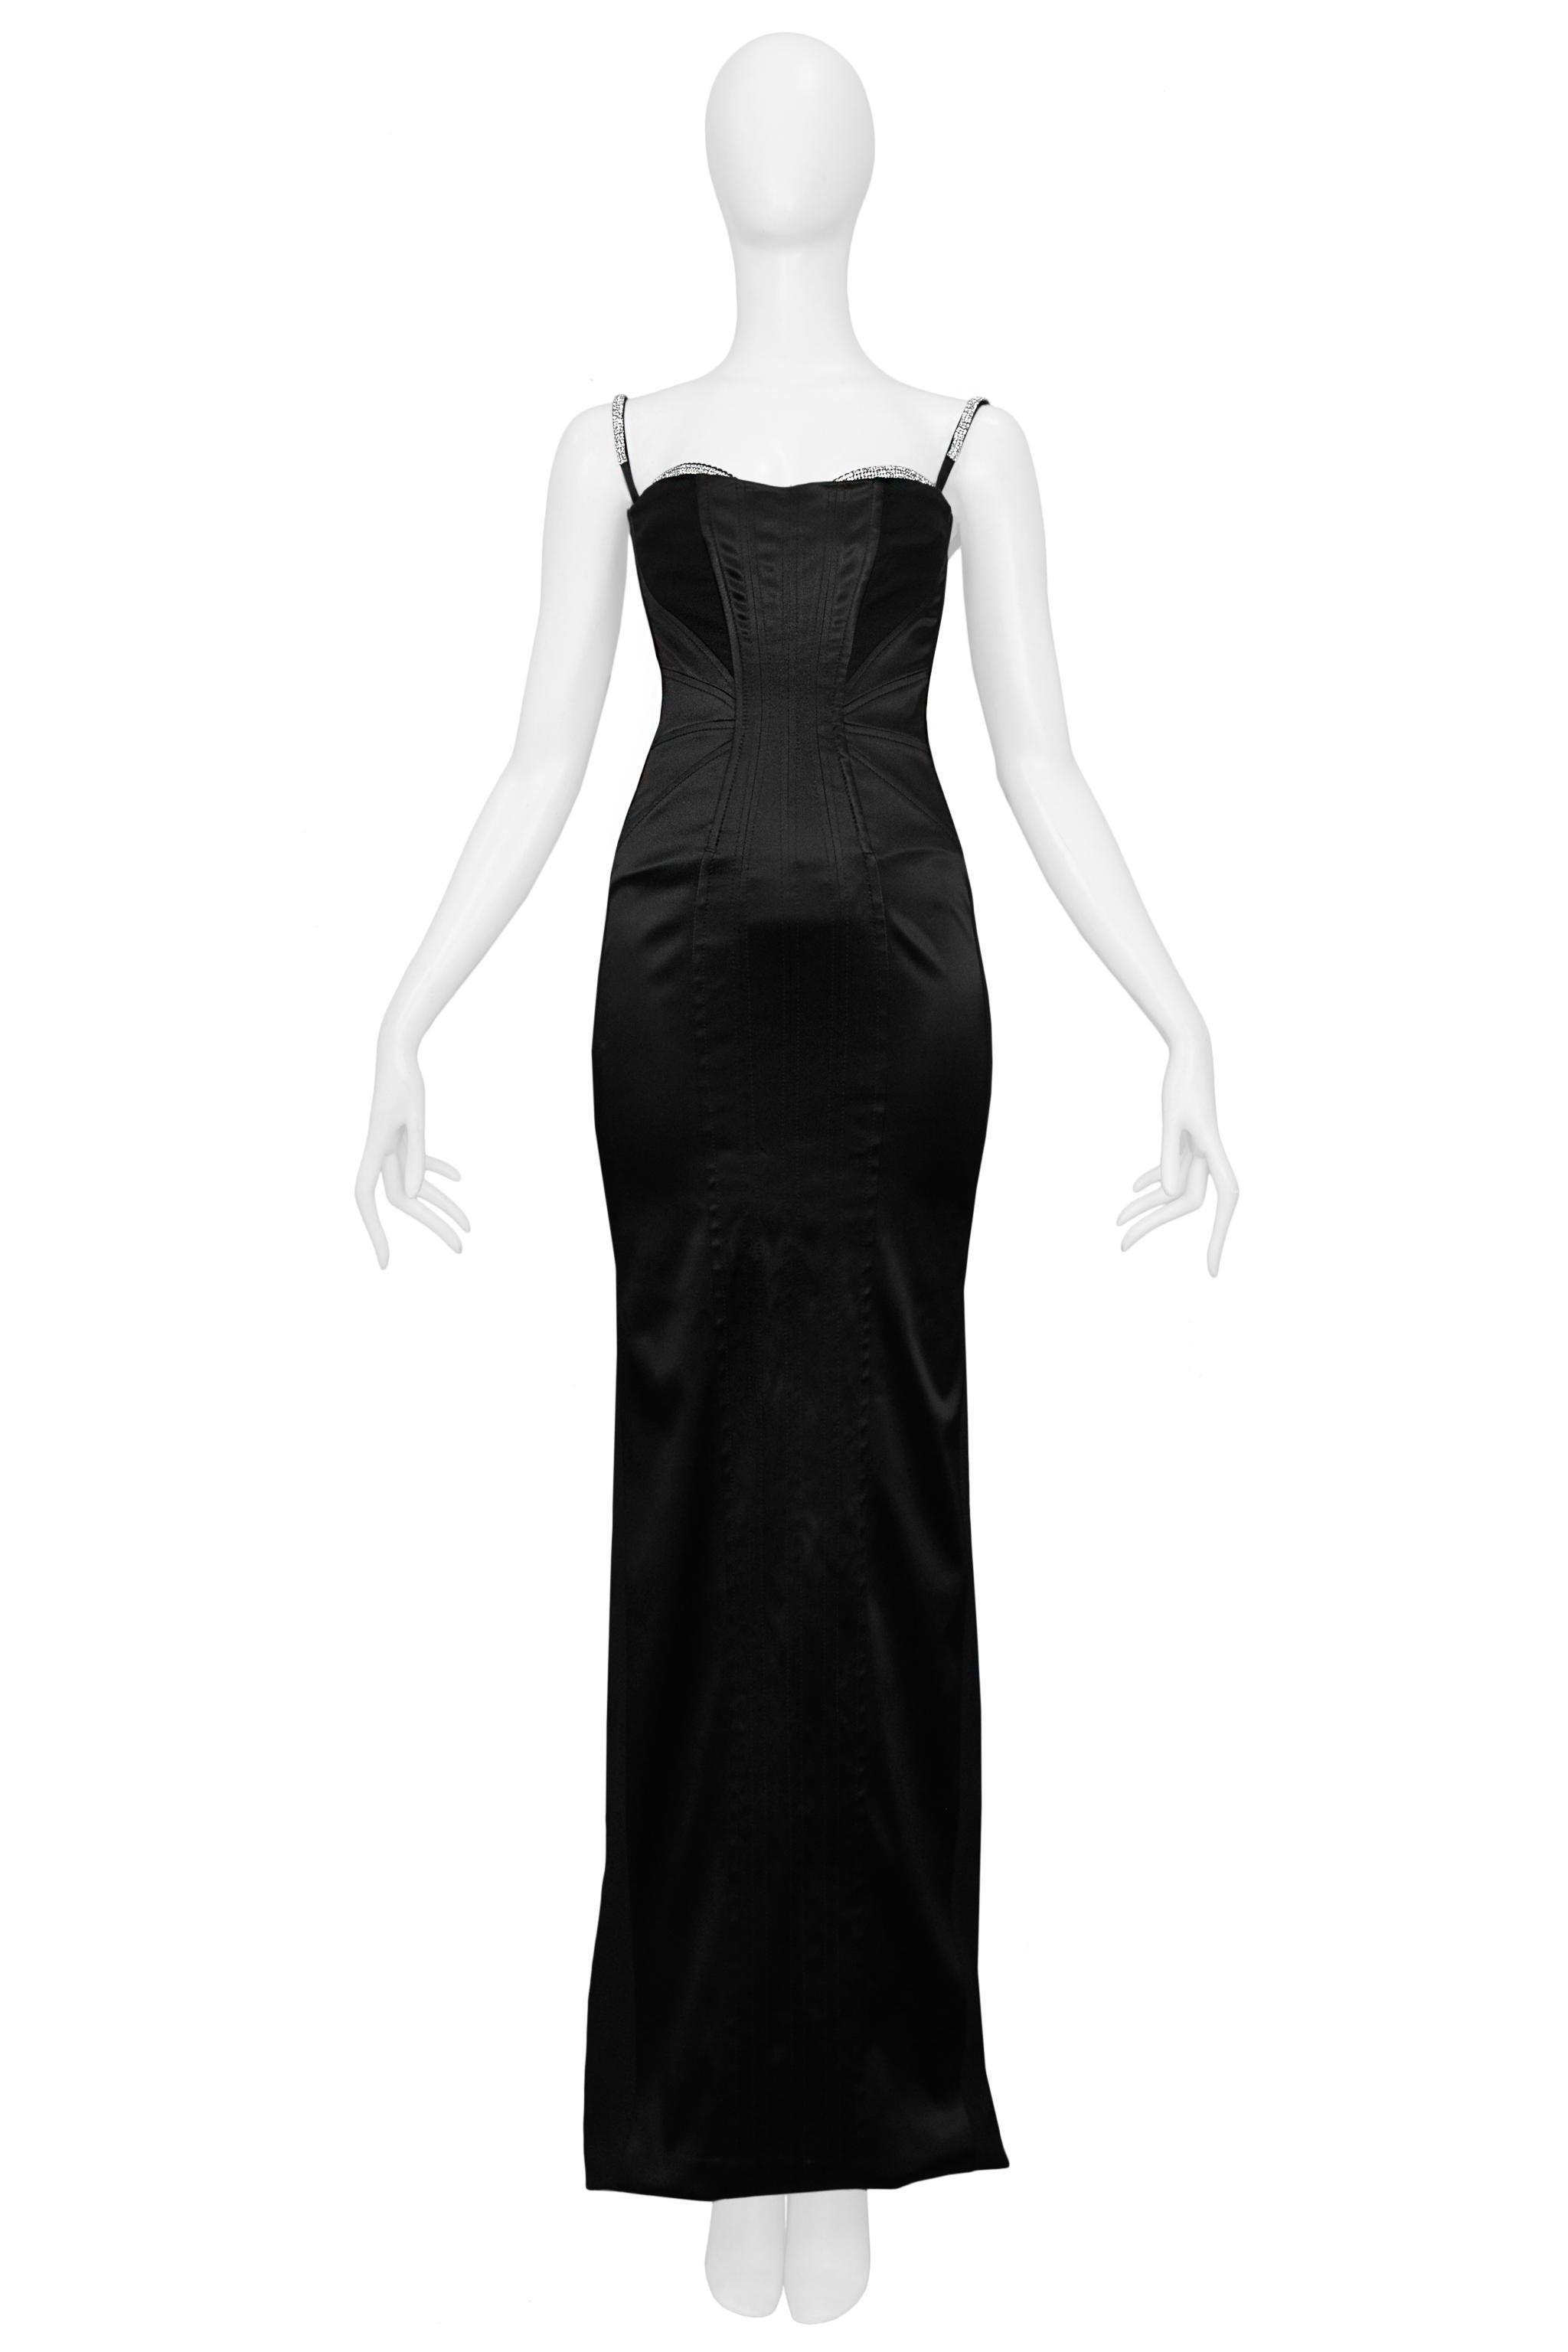 Resurrection Vintage is excited to present a vintage Dolce and Gabbana black satin evening gown featuring an attached bra with rhinestone trim, rhinestone-covered adjustable straps, a rhinestone-covered zipper pull, dramatic stitching, leopard print